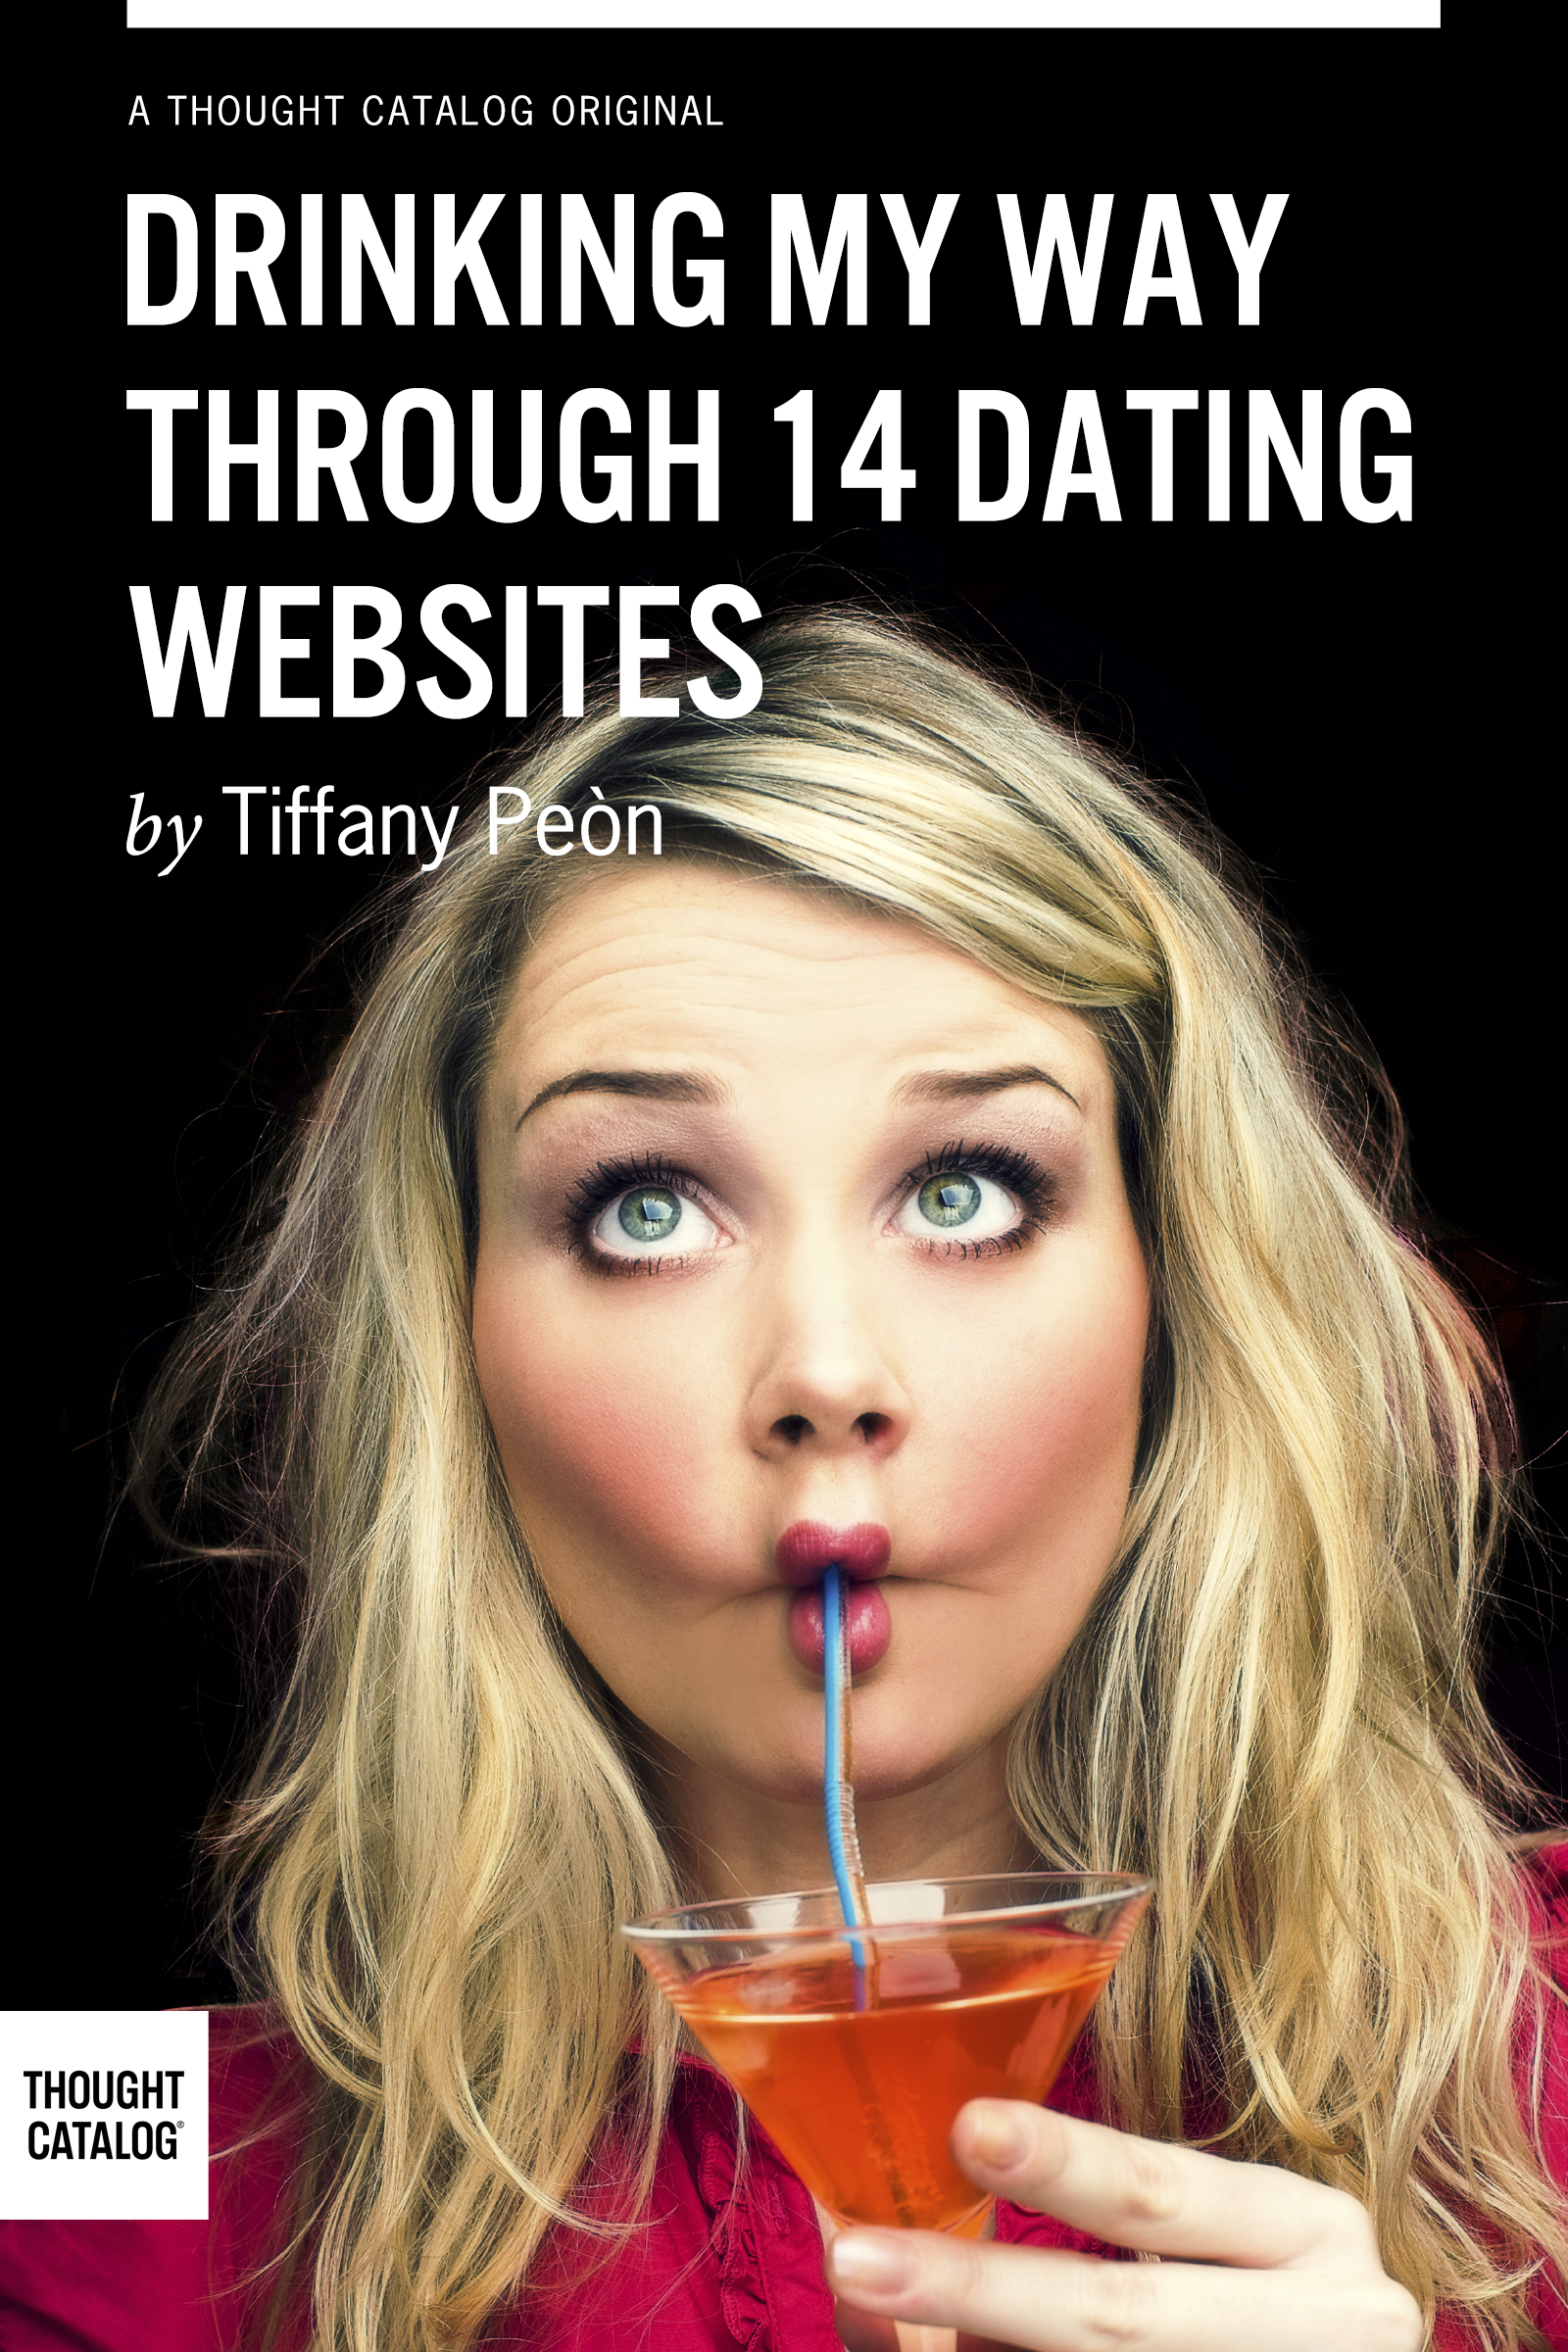 Buy "Drinking My Way Through 14 Dating Websites" Here.